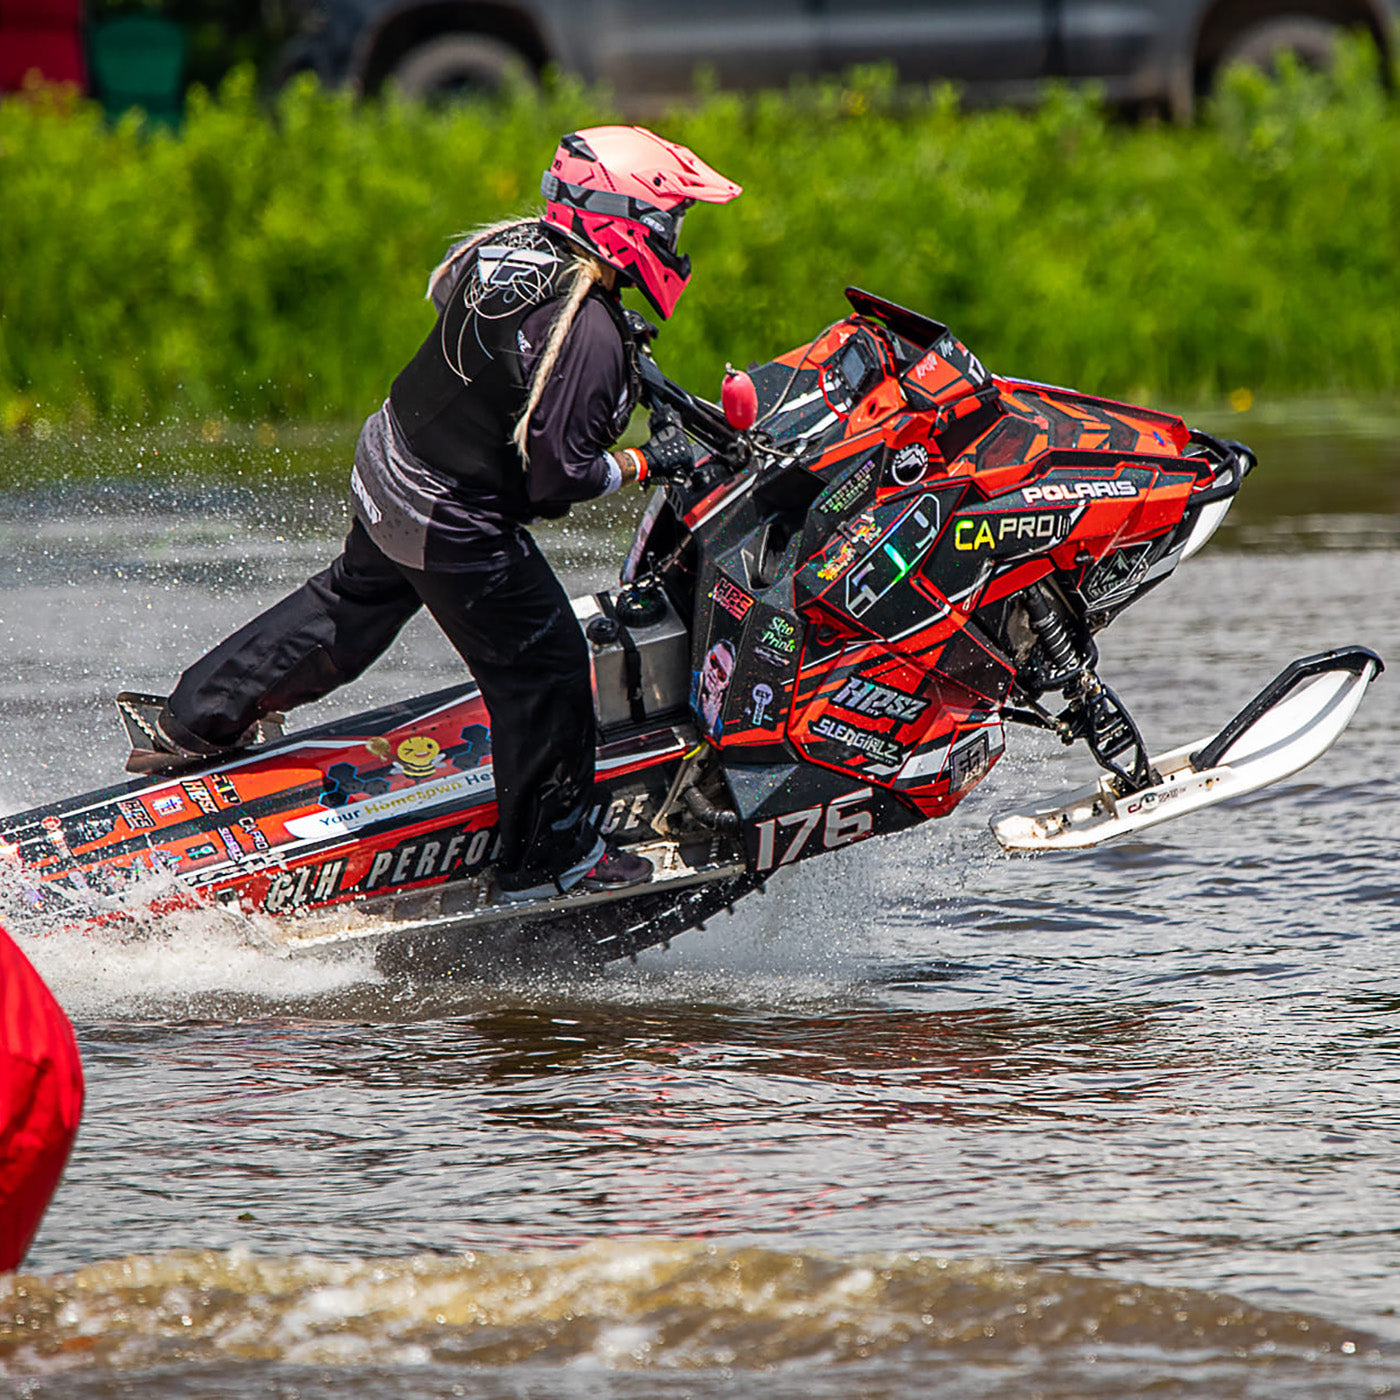 Krista Macki-Zurn racing on water with white C&A Pro skis with black handles